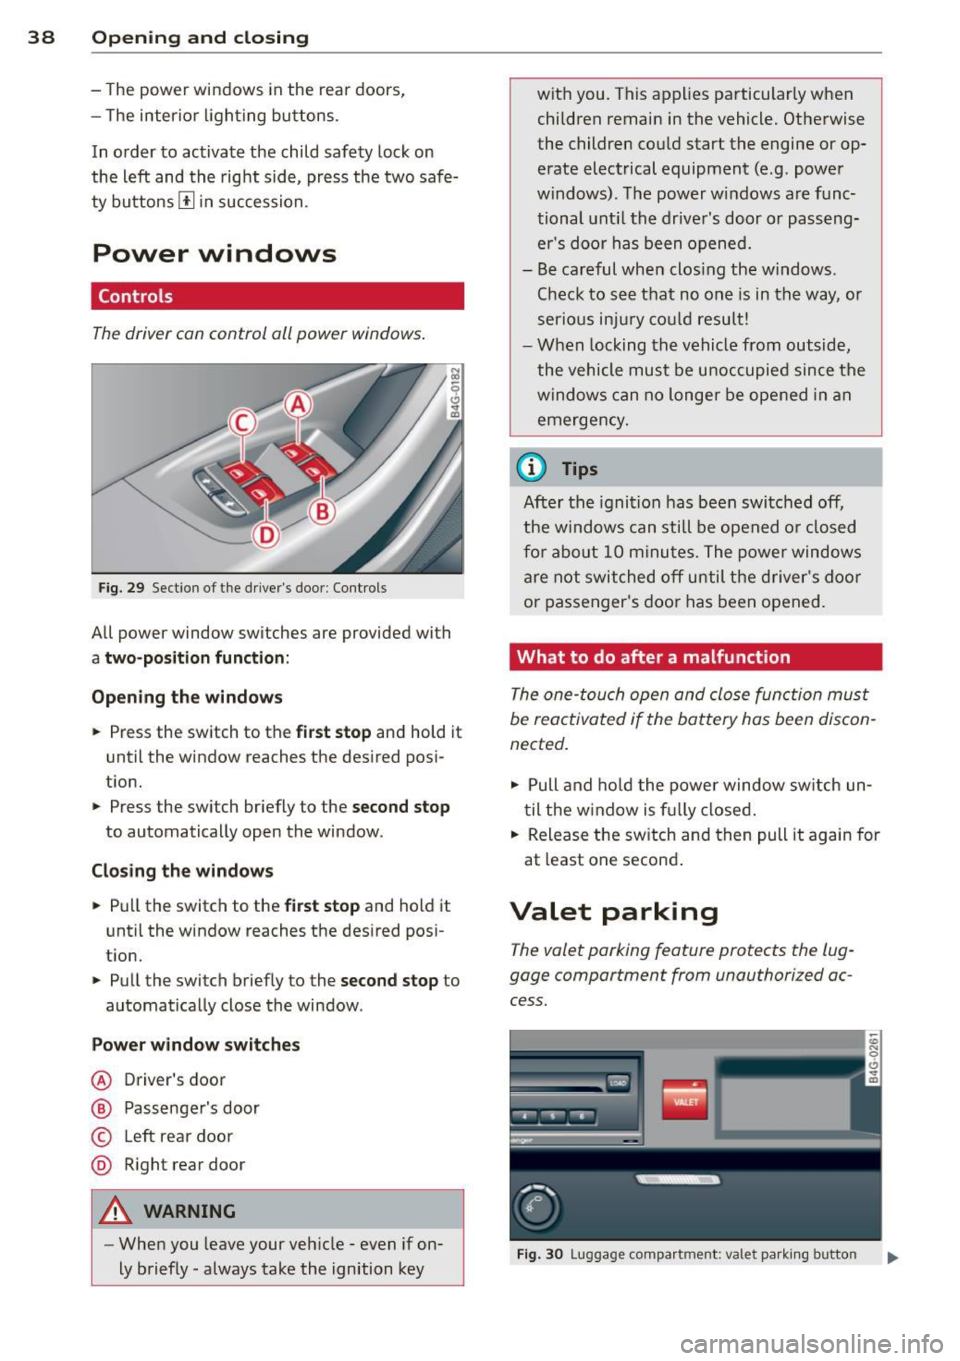 AUDI S6 2012  Owners Manual 38  Openin g and  clo sing 
- The  power  windows  in the  rear  doors, 
- The  interior  l ighting  buttons. 
In  order  to  activate  the  child  safety  lock on 
the  left  and  the  right  side,  